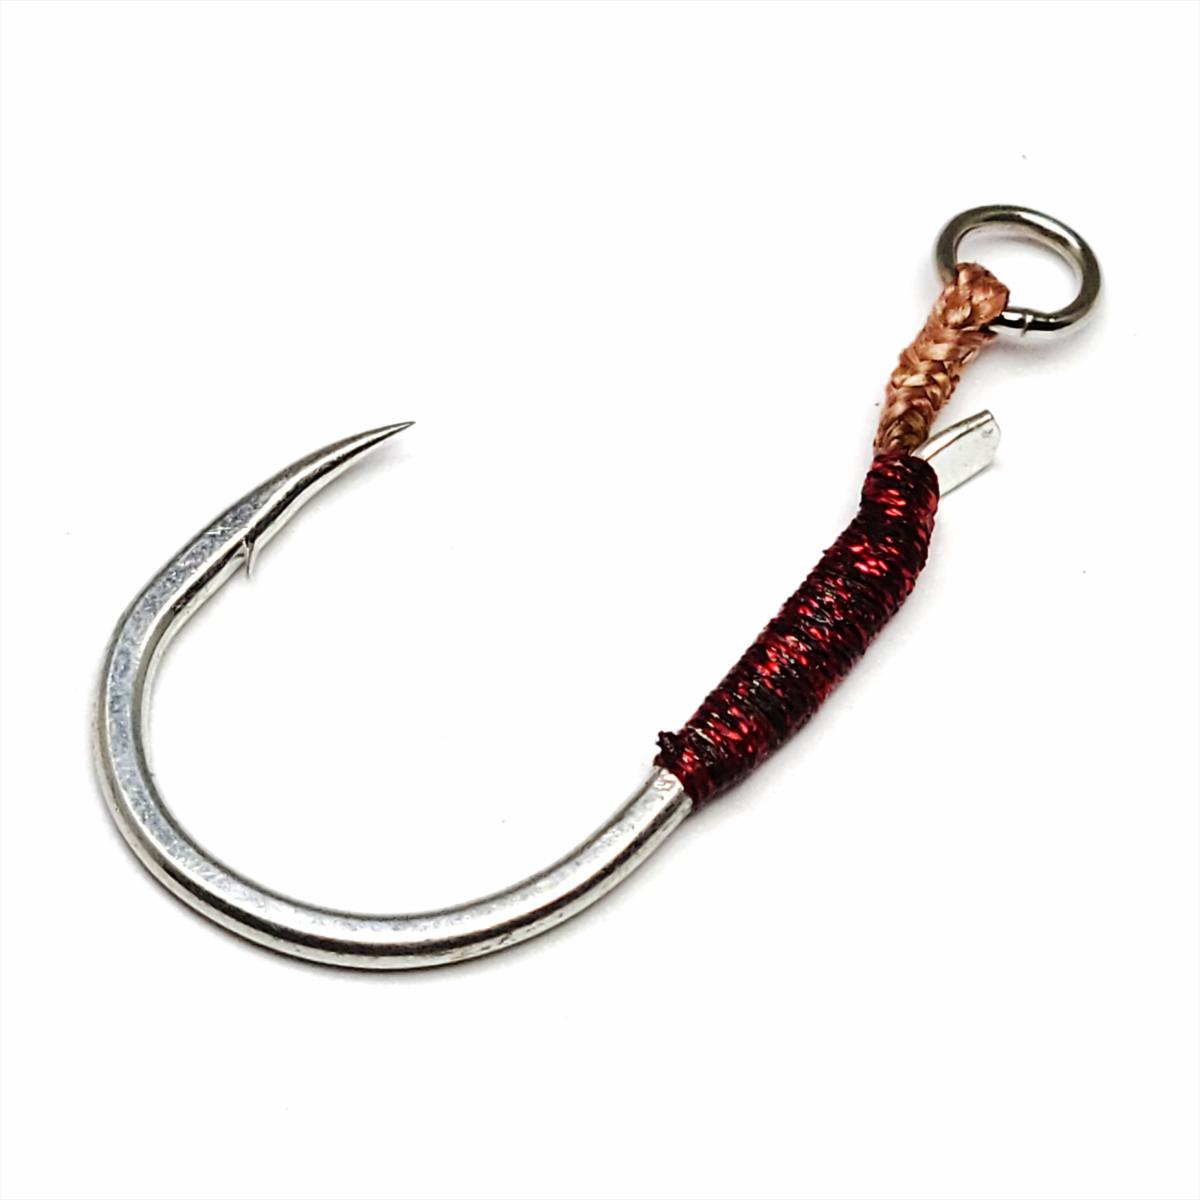 OROOTL Fishing Assist Jigging Hooks with PE Line, India